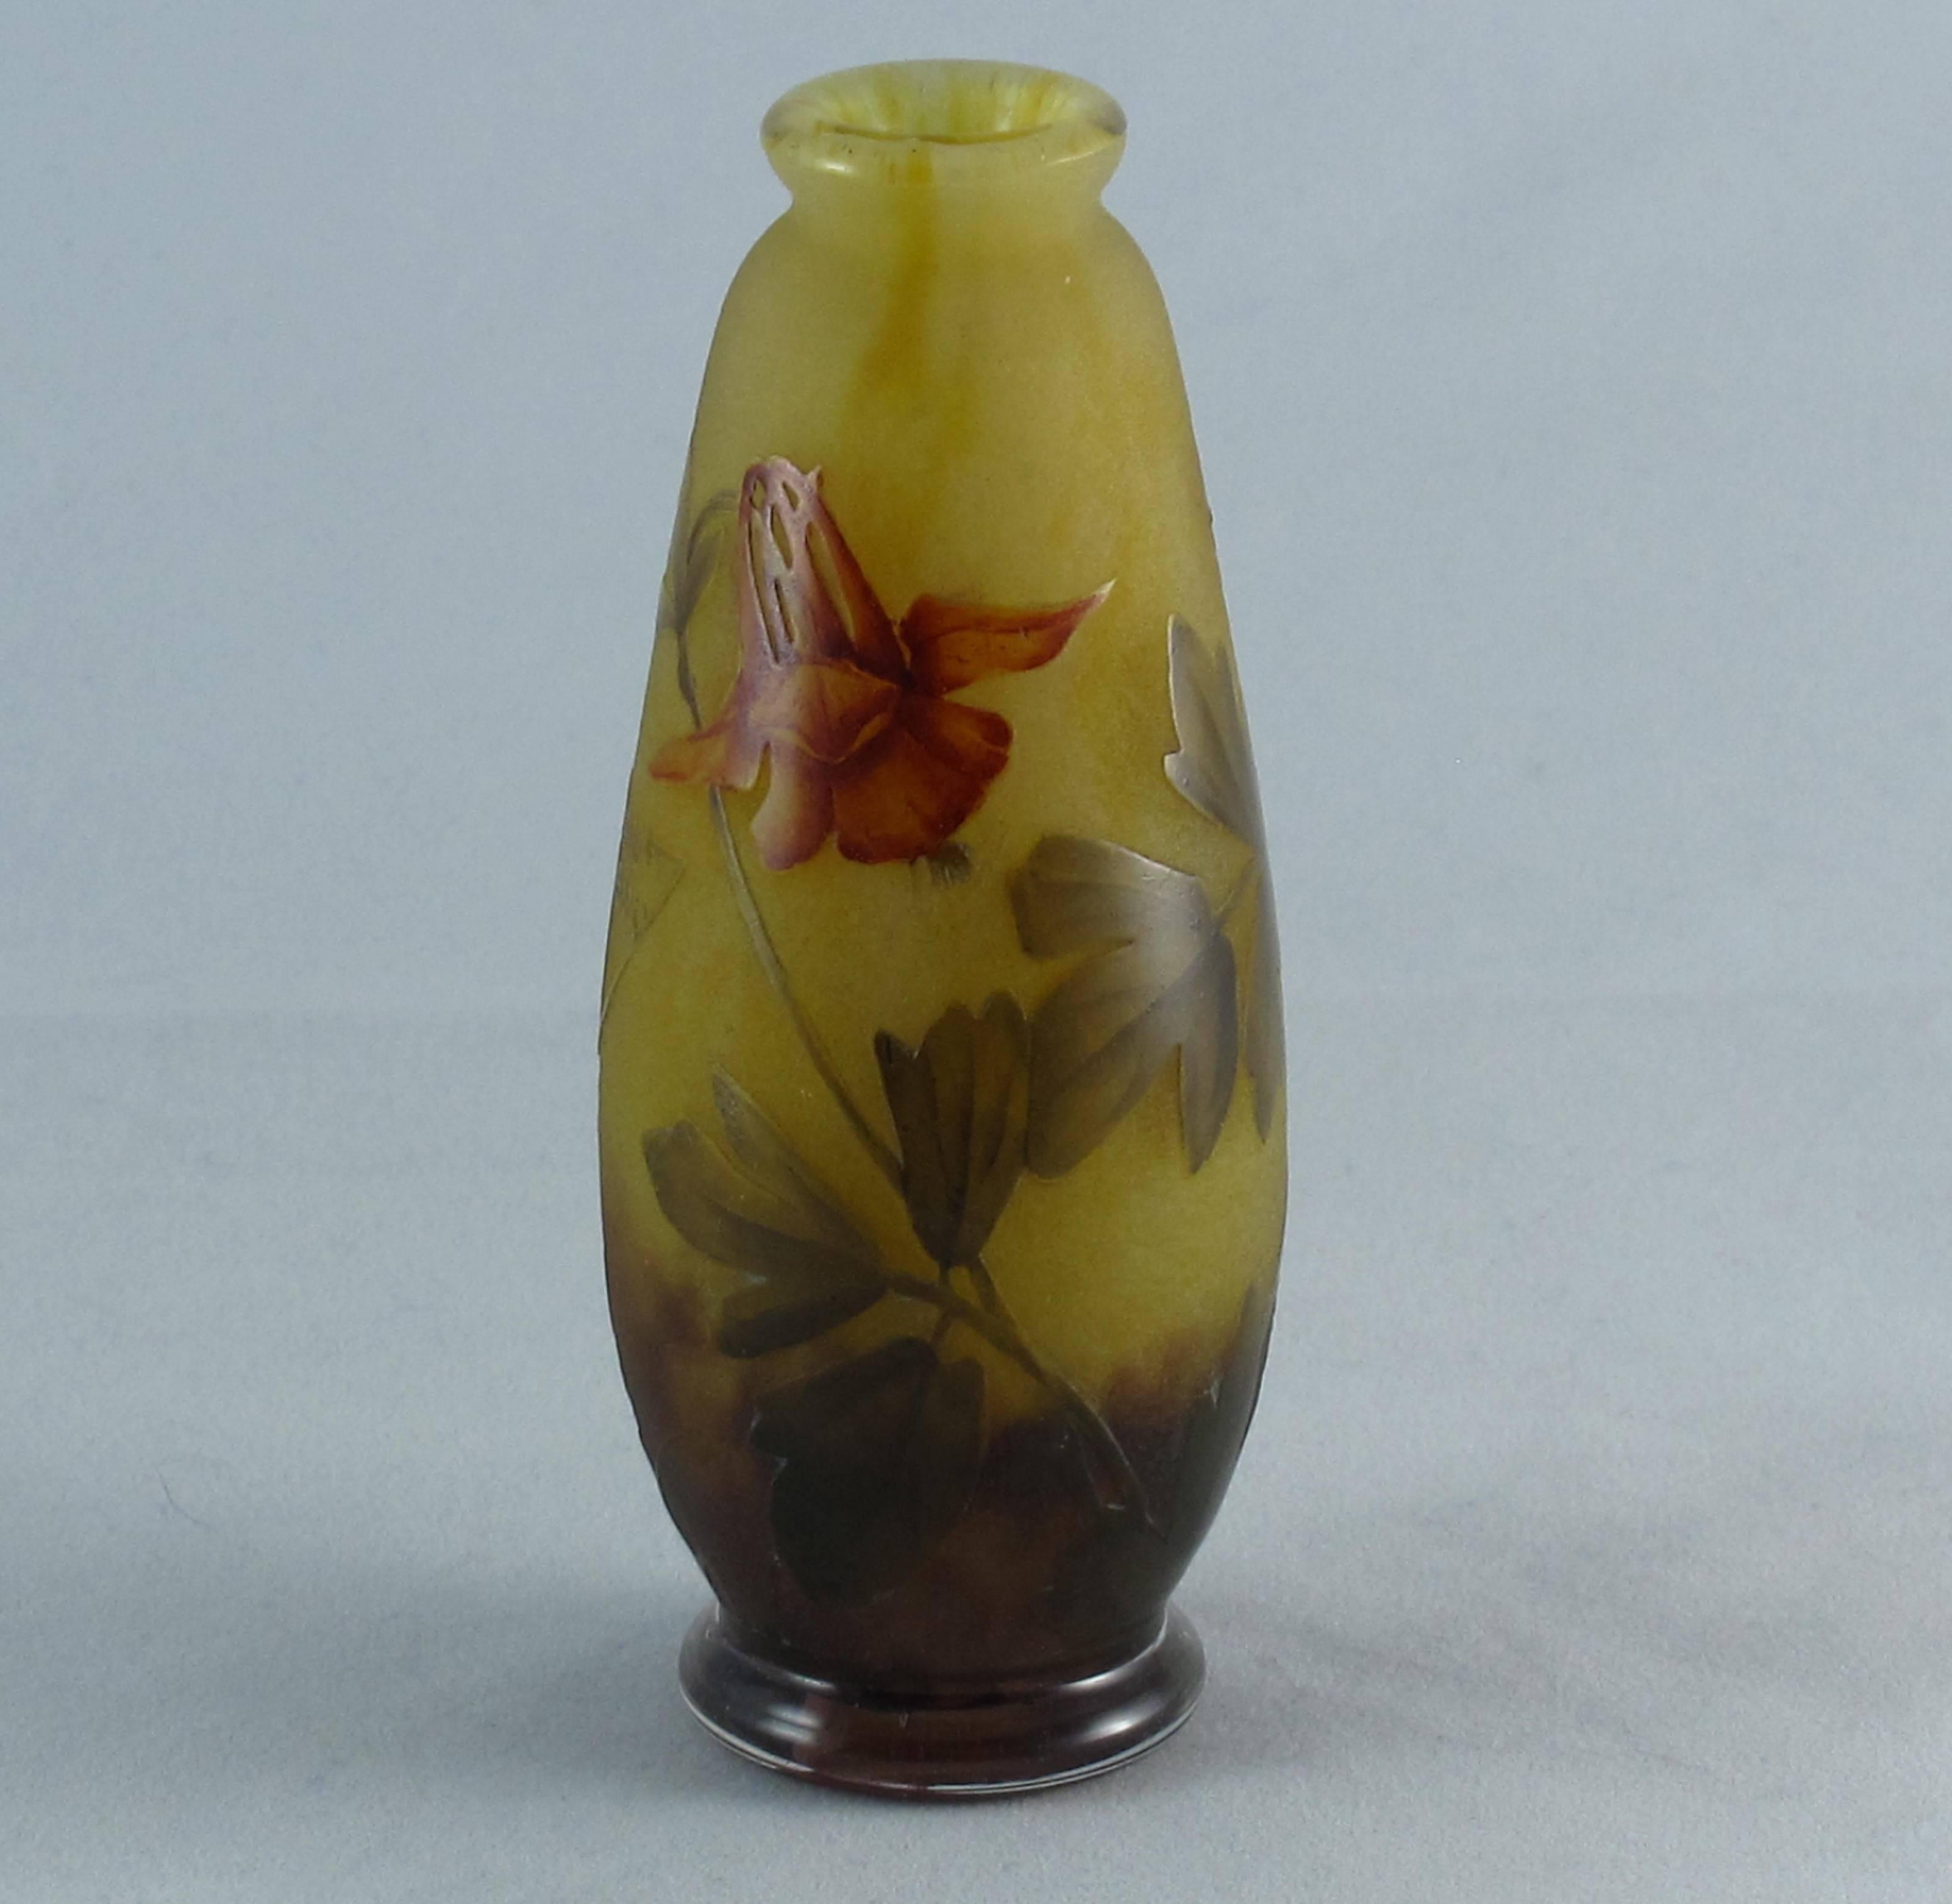 French Art Nouveau Daum Acid Etched and Enamelled Cameo Glass Vase For Sale